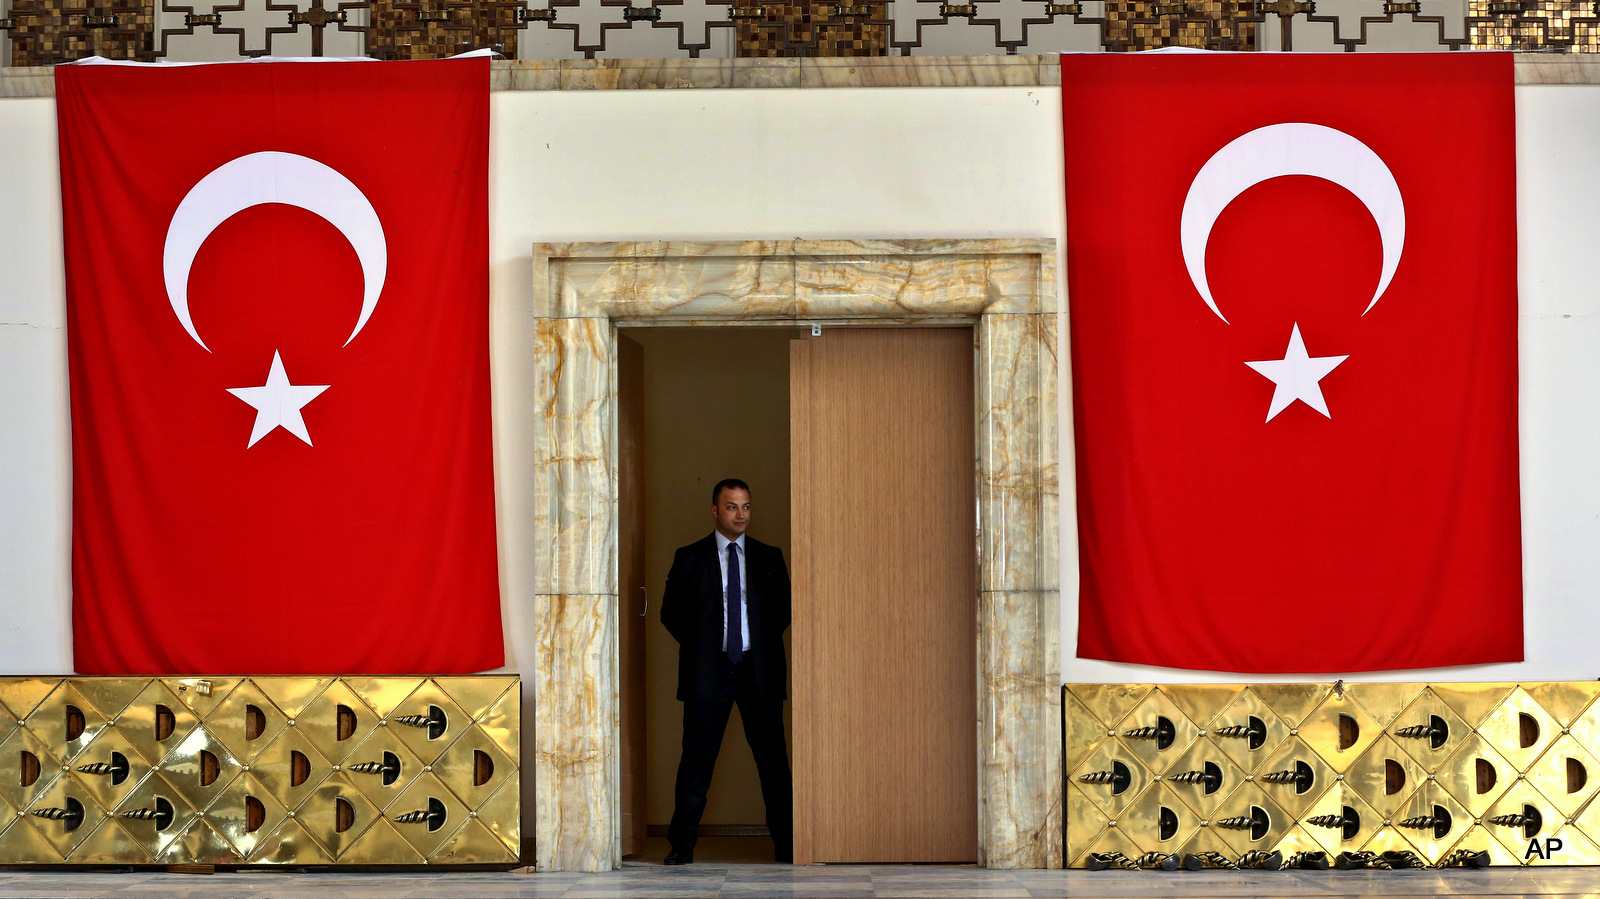 A Turkish parliament security man stands guard next to the broken yellow copper doors laid on the ground at the entrance of the assembly hall at the parliament building which was attacked by the Turkish warplanes during the failed military coup last Friday, in Ankara, Turkey, Tuesday, July 19, 2016.